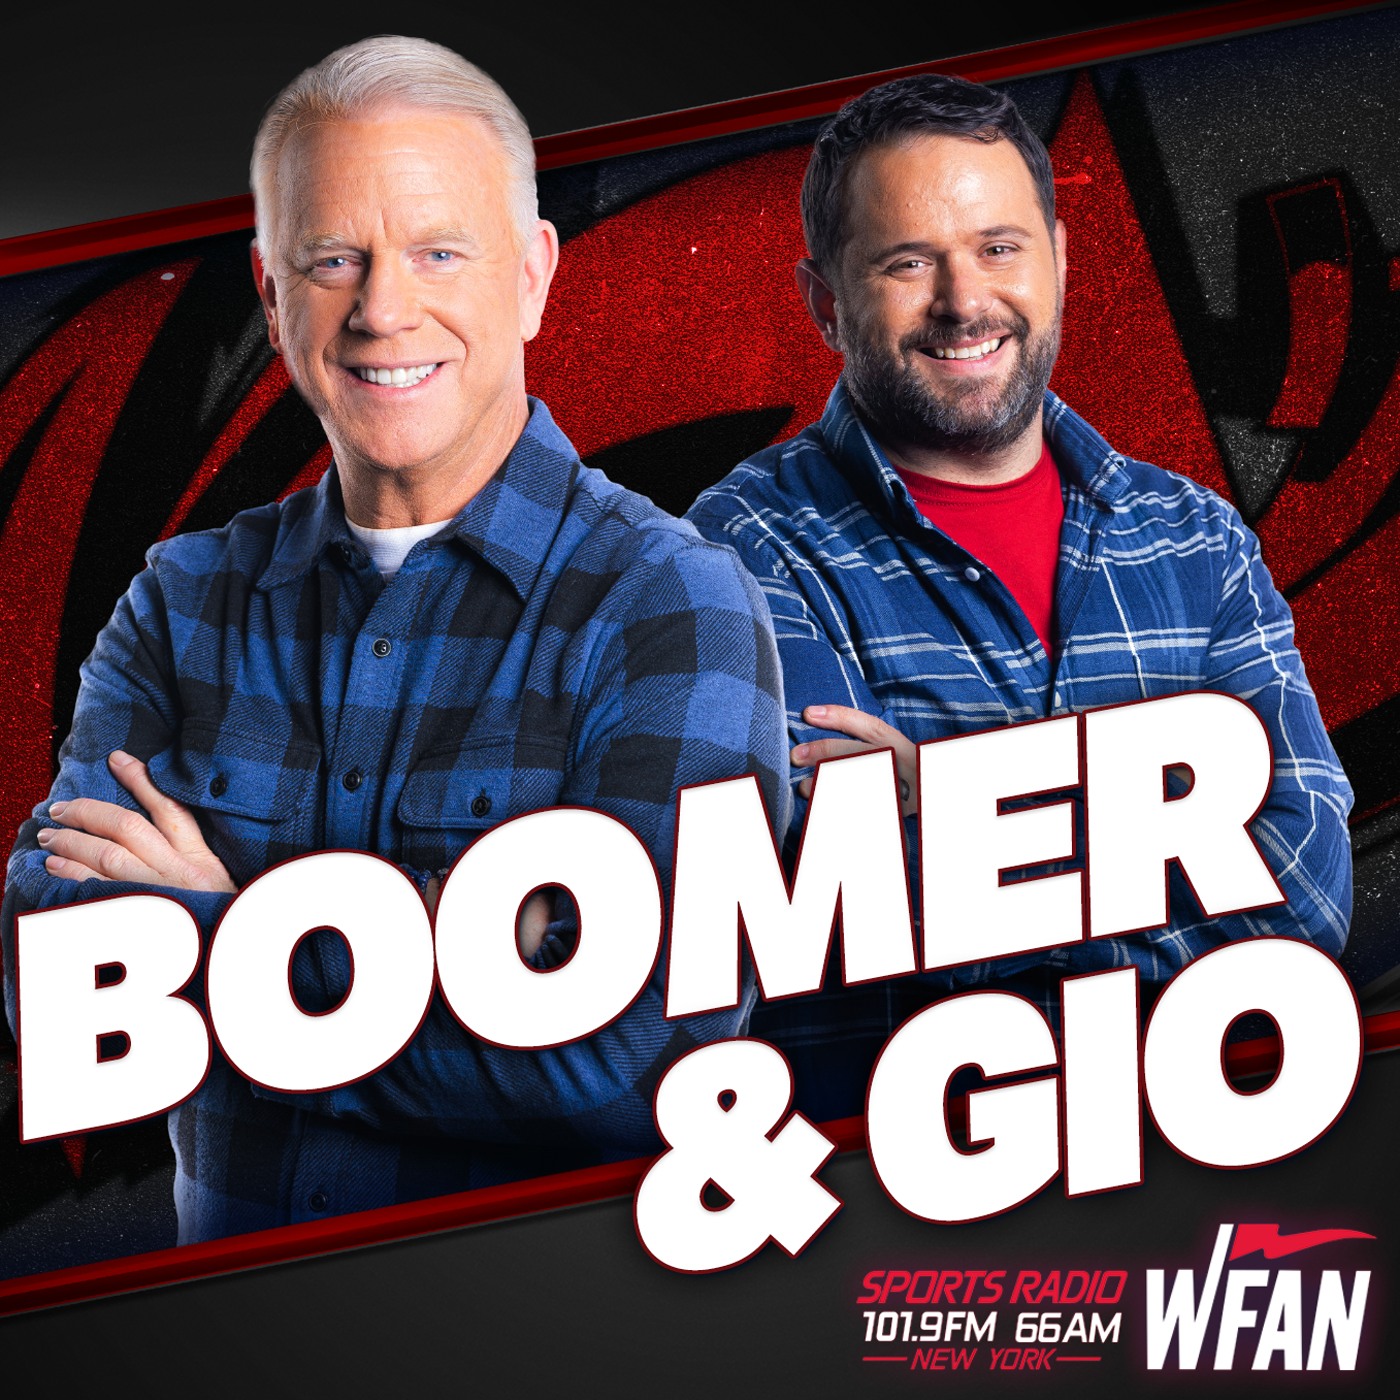 Boomer's Back As Rangers & Knicks Win - He's Got Some Critiques; Jerry With Sound; John Sterling Day Doesn't Impress Boomer; We Learn About His Canada Trip (Hour 1)